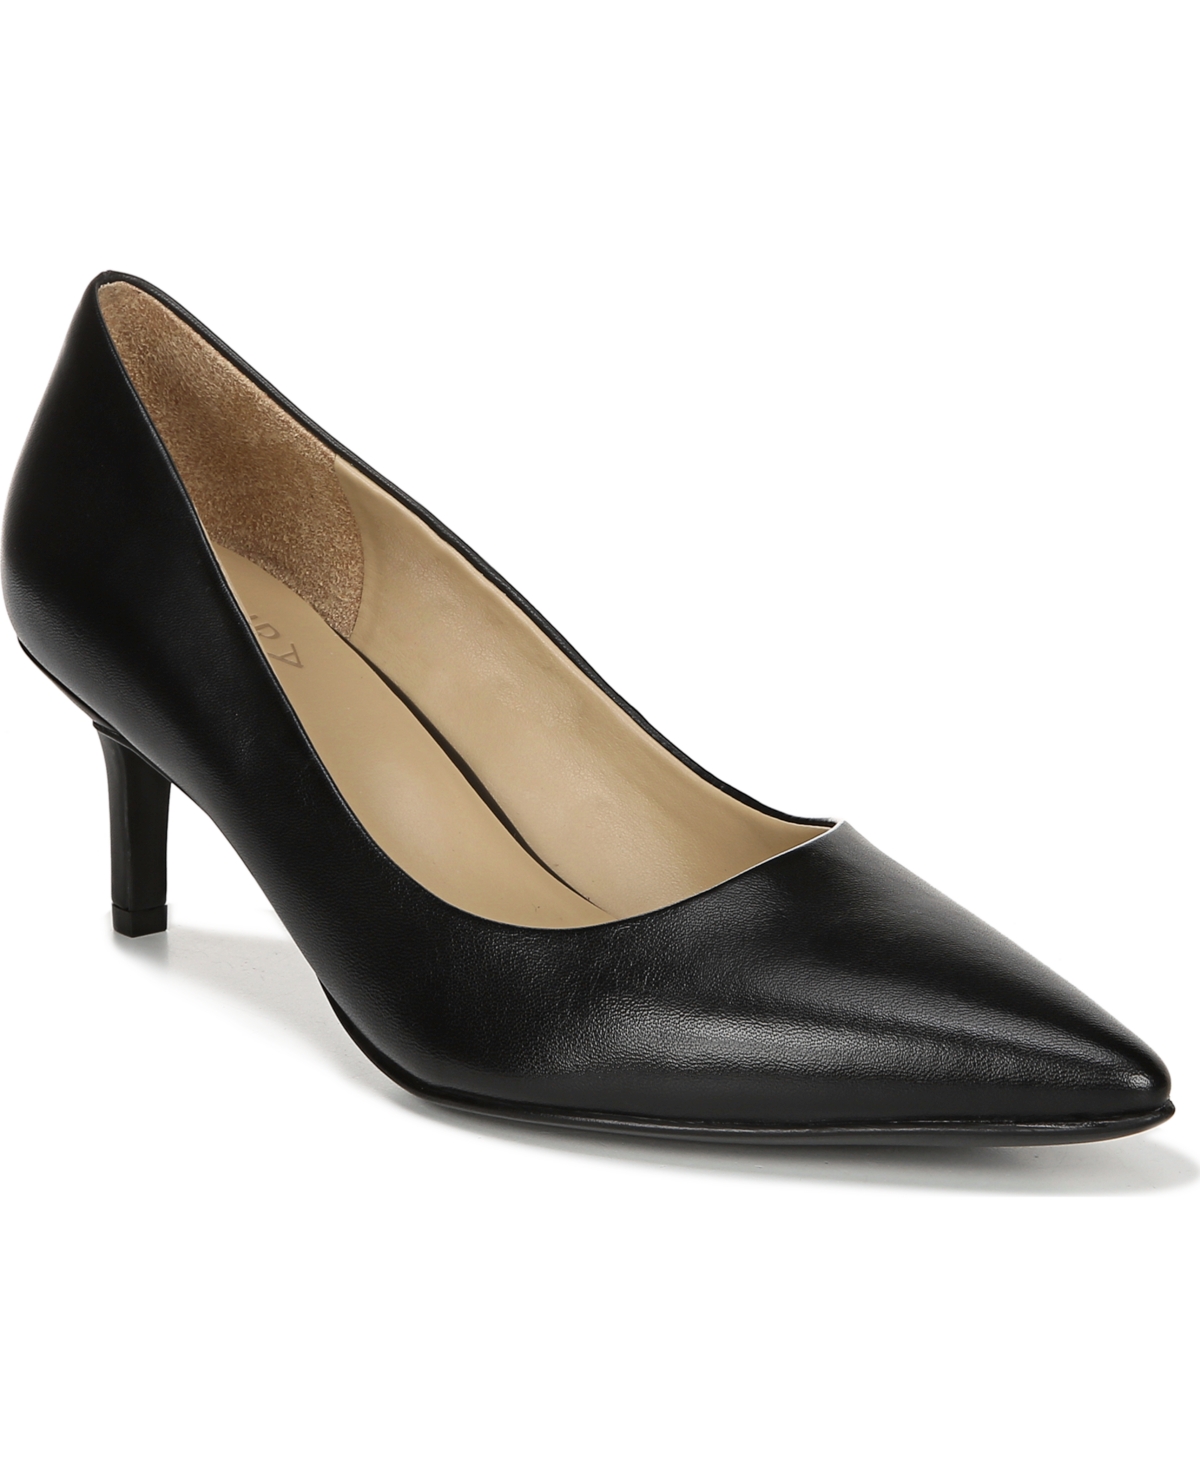 Everly Pumps - Black Leather